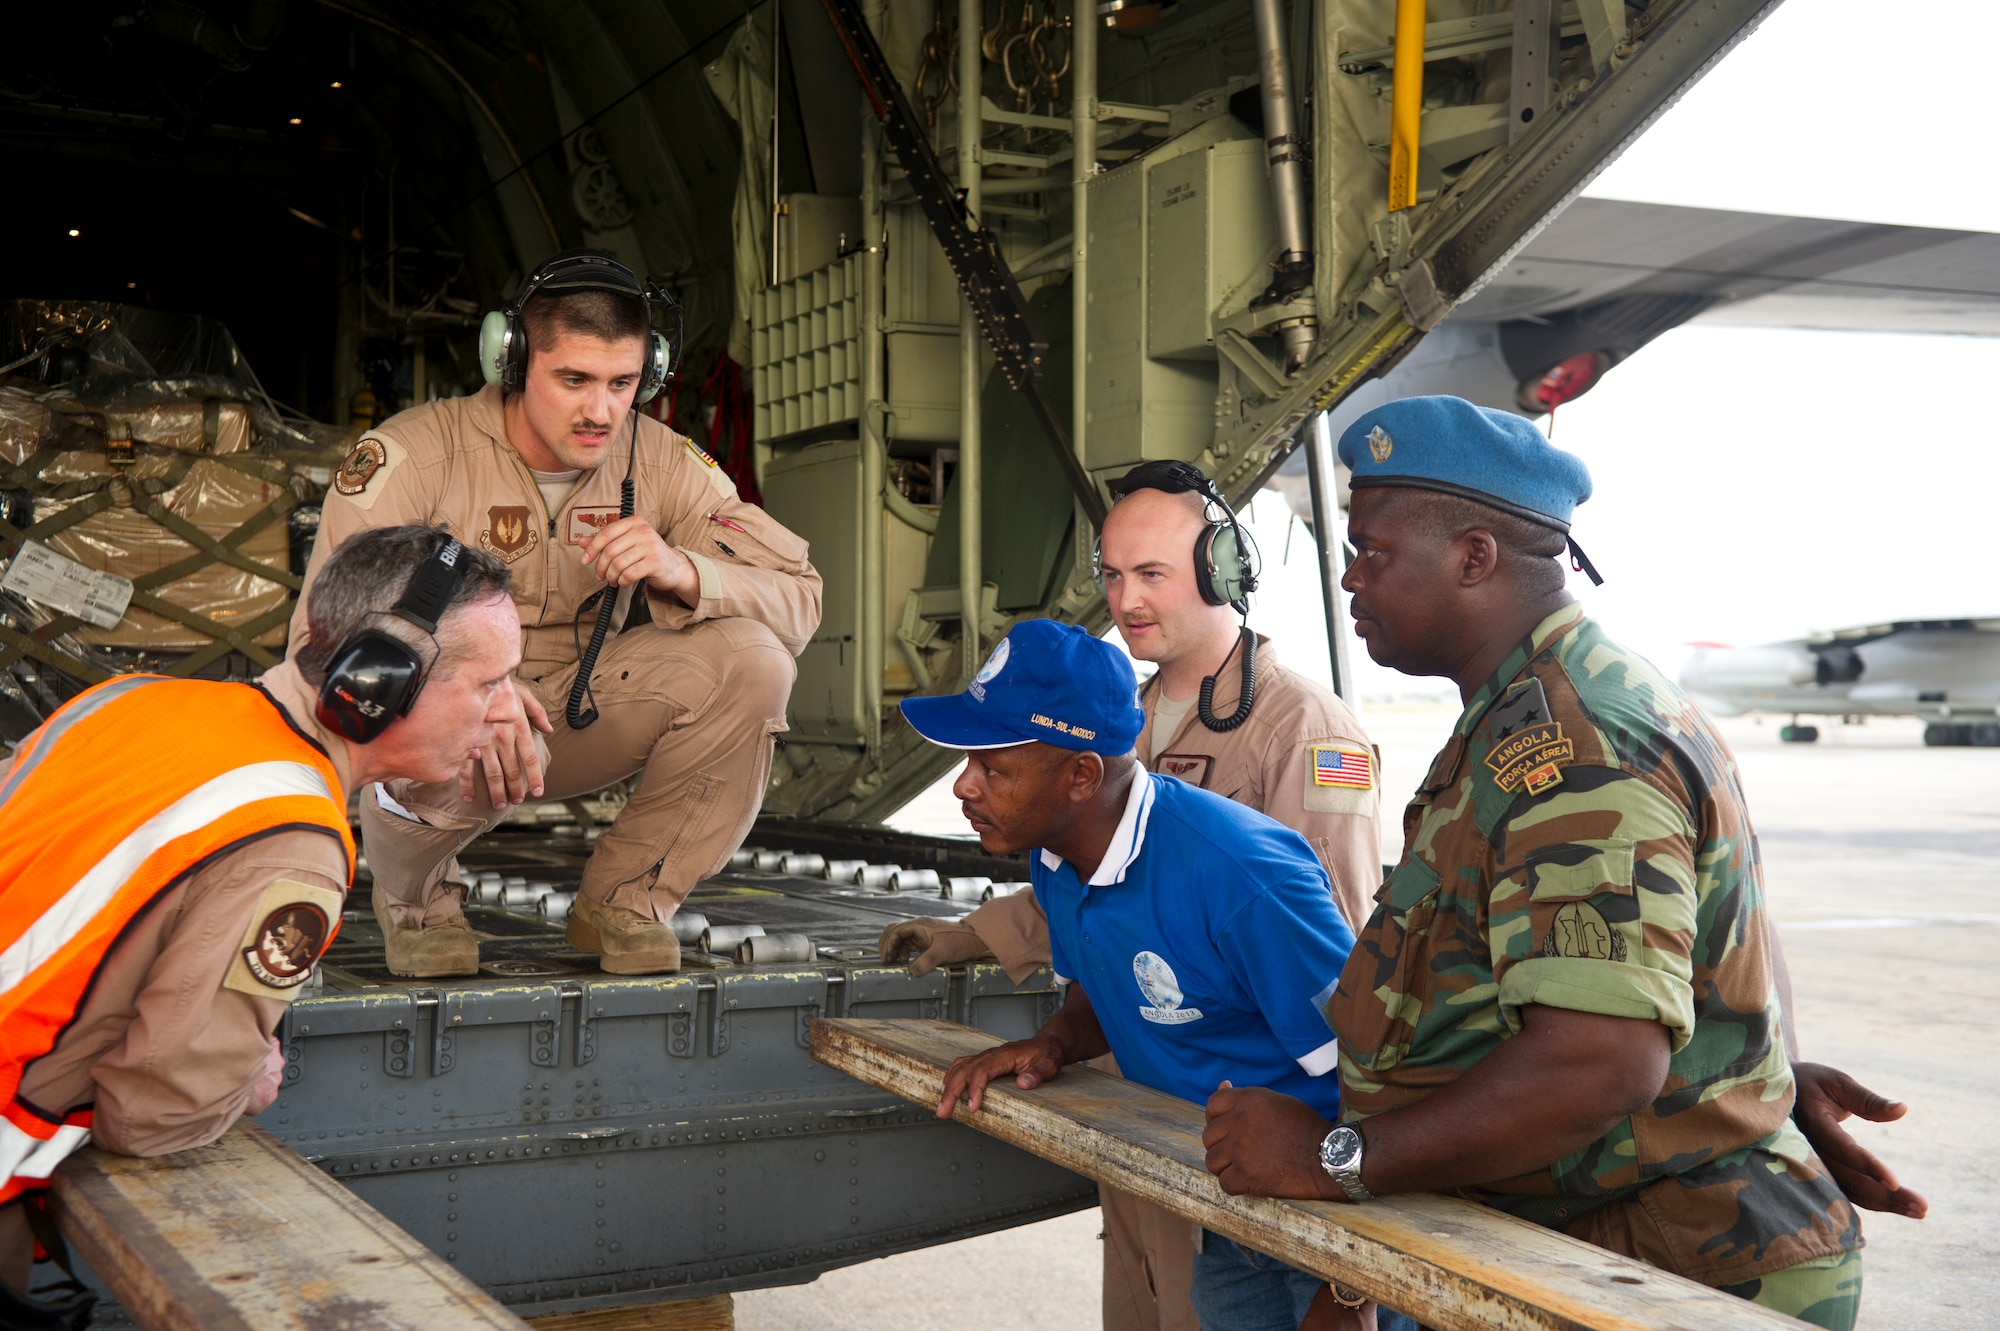 U.S. and Angolan airmen discuss unloading a C-130J Super Hercules from the 37th Airlift Squadron at Luanda Air Base, Angola, March 22, 2014. The C-130J and about 20 U.S. Air Force airmen are in Angola to participate in African Partnership Flight with the Angolan and Zambian air forces, an event which provides a collaborative learning environment for the airmen. (U.S. Air Force photo/Tech. Sgt. Benjamin Wilson)